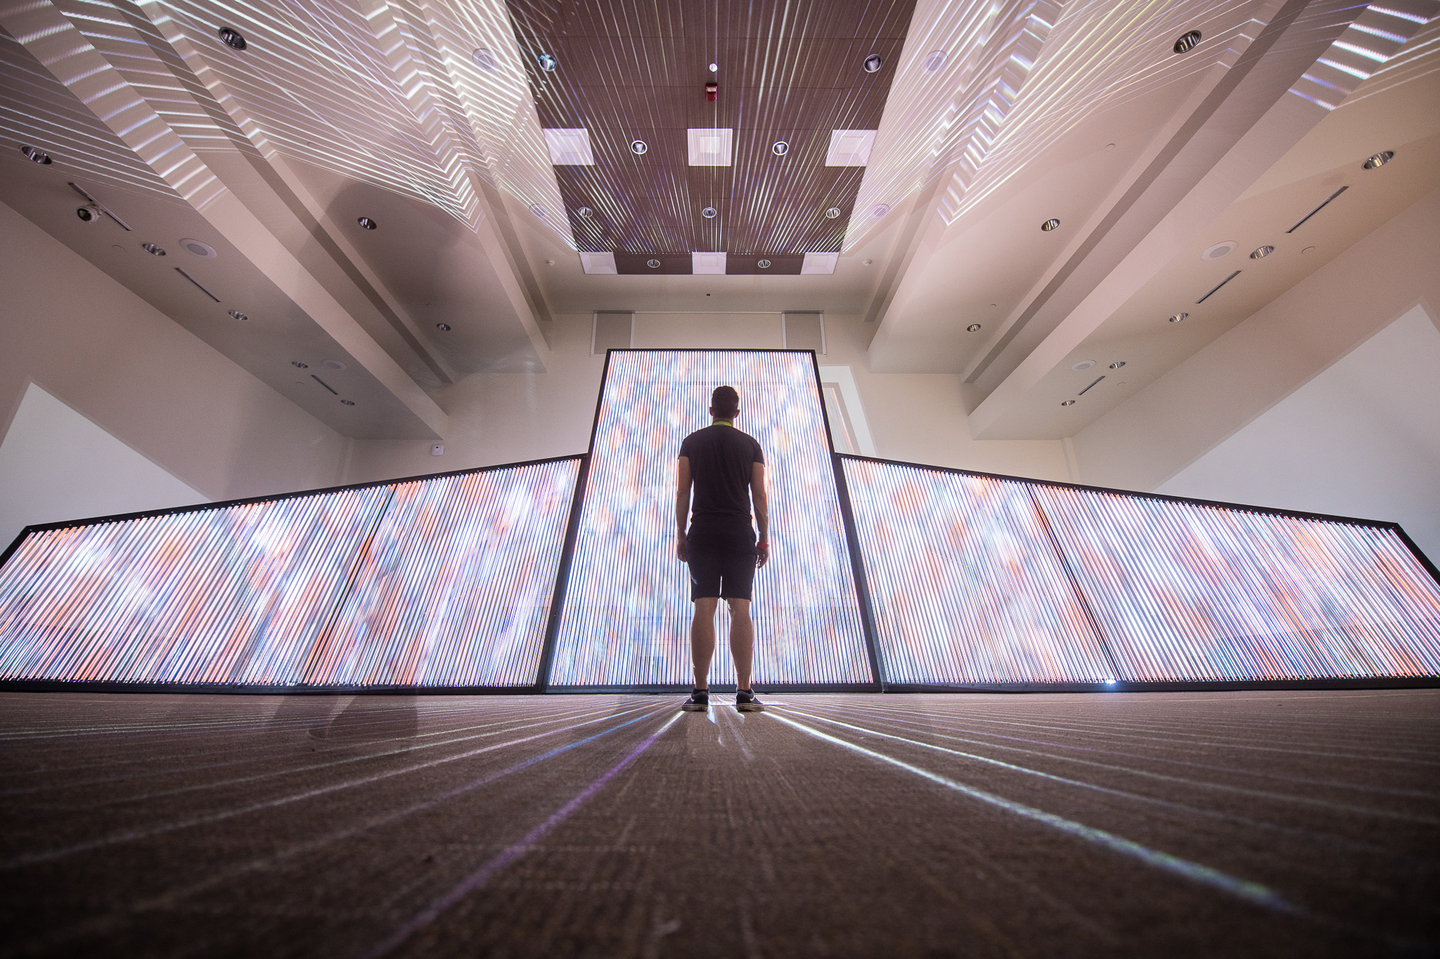 Inspired by the creation of textiles in Mexico through looms, the audiovisual installation uses a large ¨canvas¨ made out of strings of light as a medium of expression. Find it in Room 3 on the first floor of the Austin Convention Center.